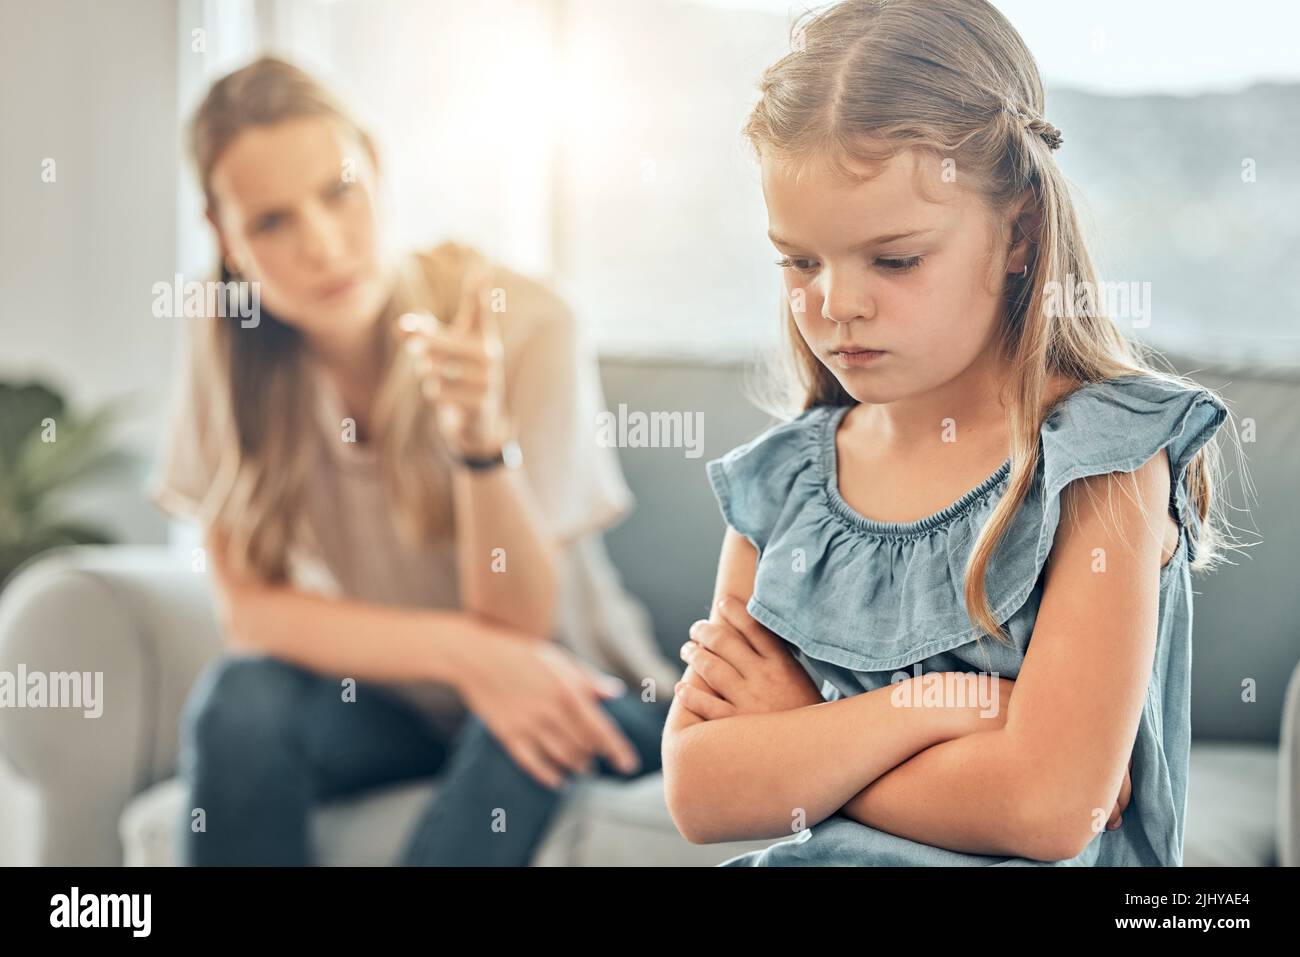 Closeup of an adorable little girl standing with arms crossed and looking upset while being scolded and reprimanded by her angry and disappointed Stock Photo